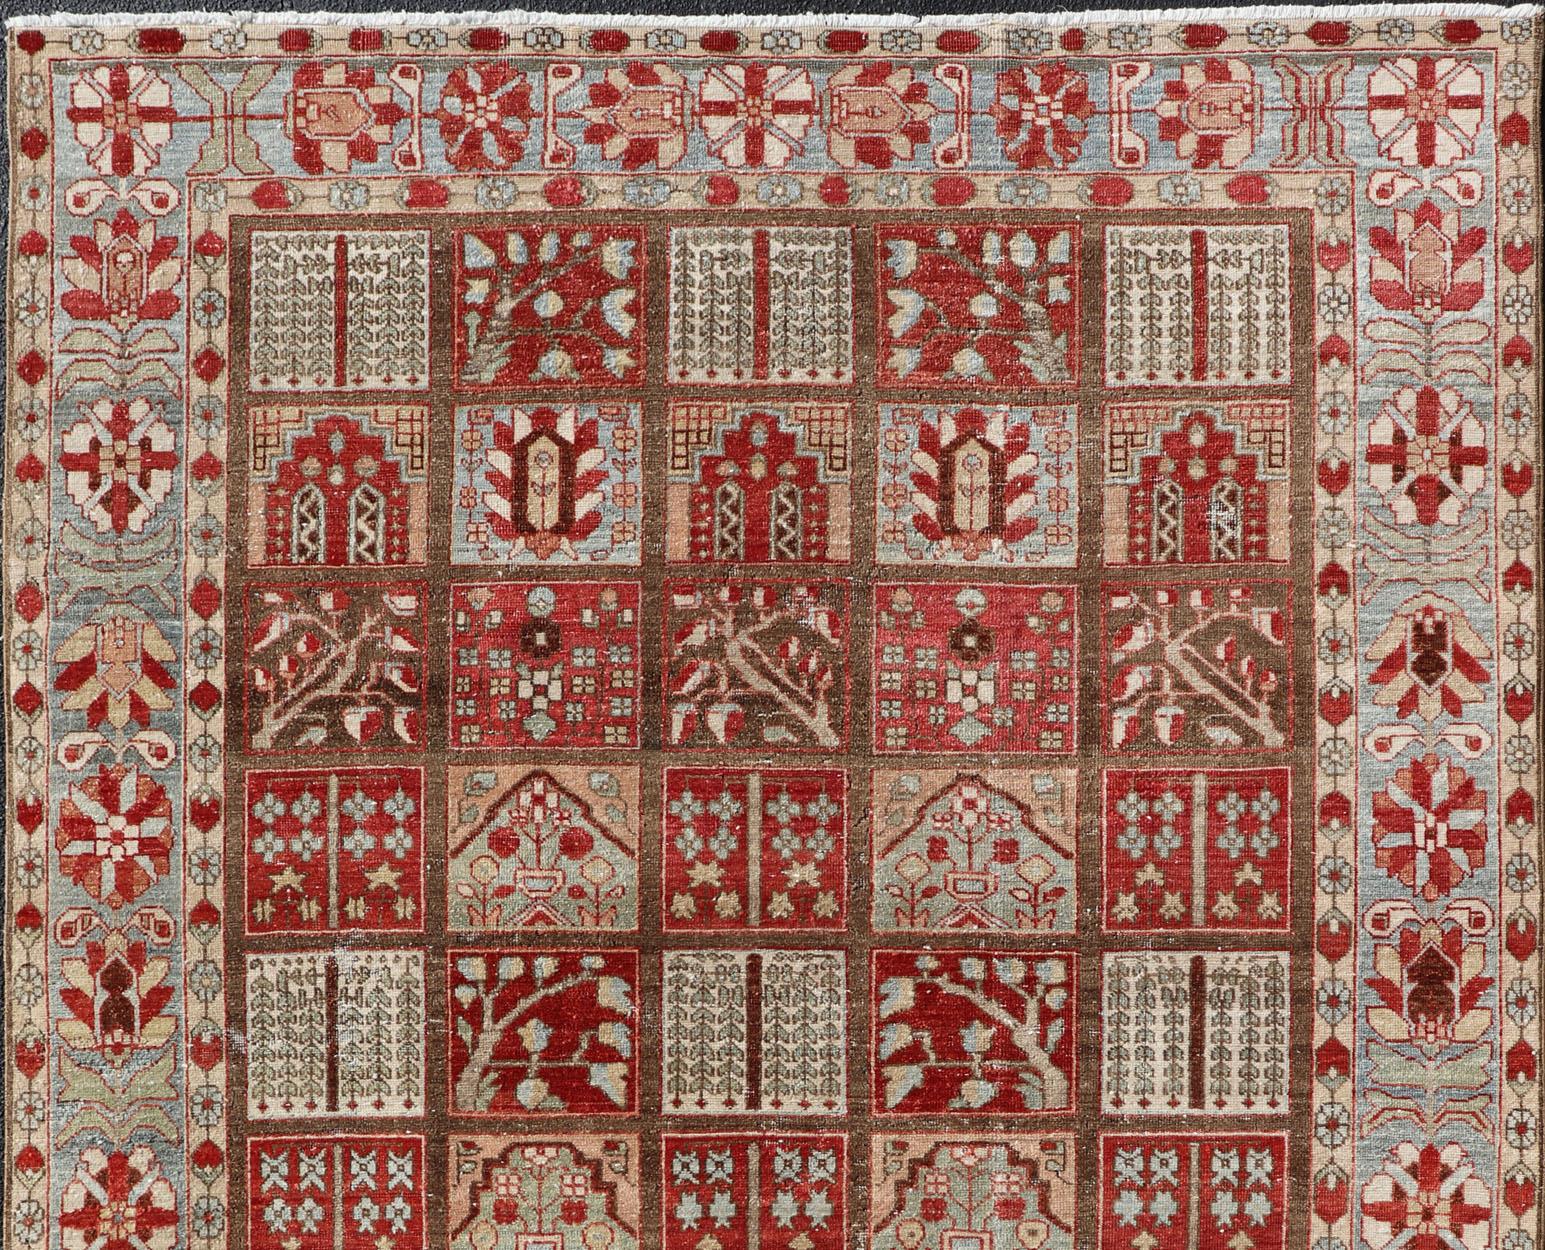 Beautiful and cheery colors of this garden design Persian antique carpet with colorful garden motifs, rug R20-0723, country of origin / type: Iran / Bakhtiari, circa 1930's

This antique Bakhtiari rug from mid-20th century Persia features design